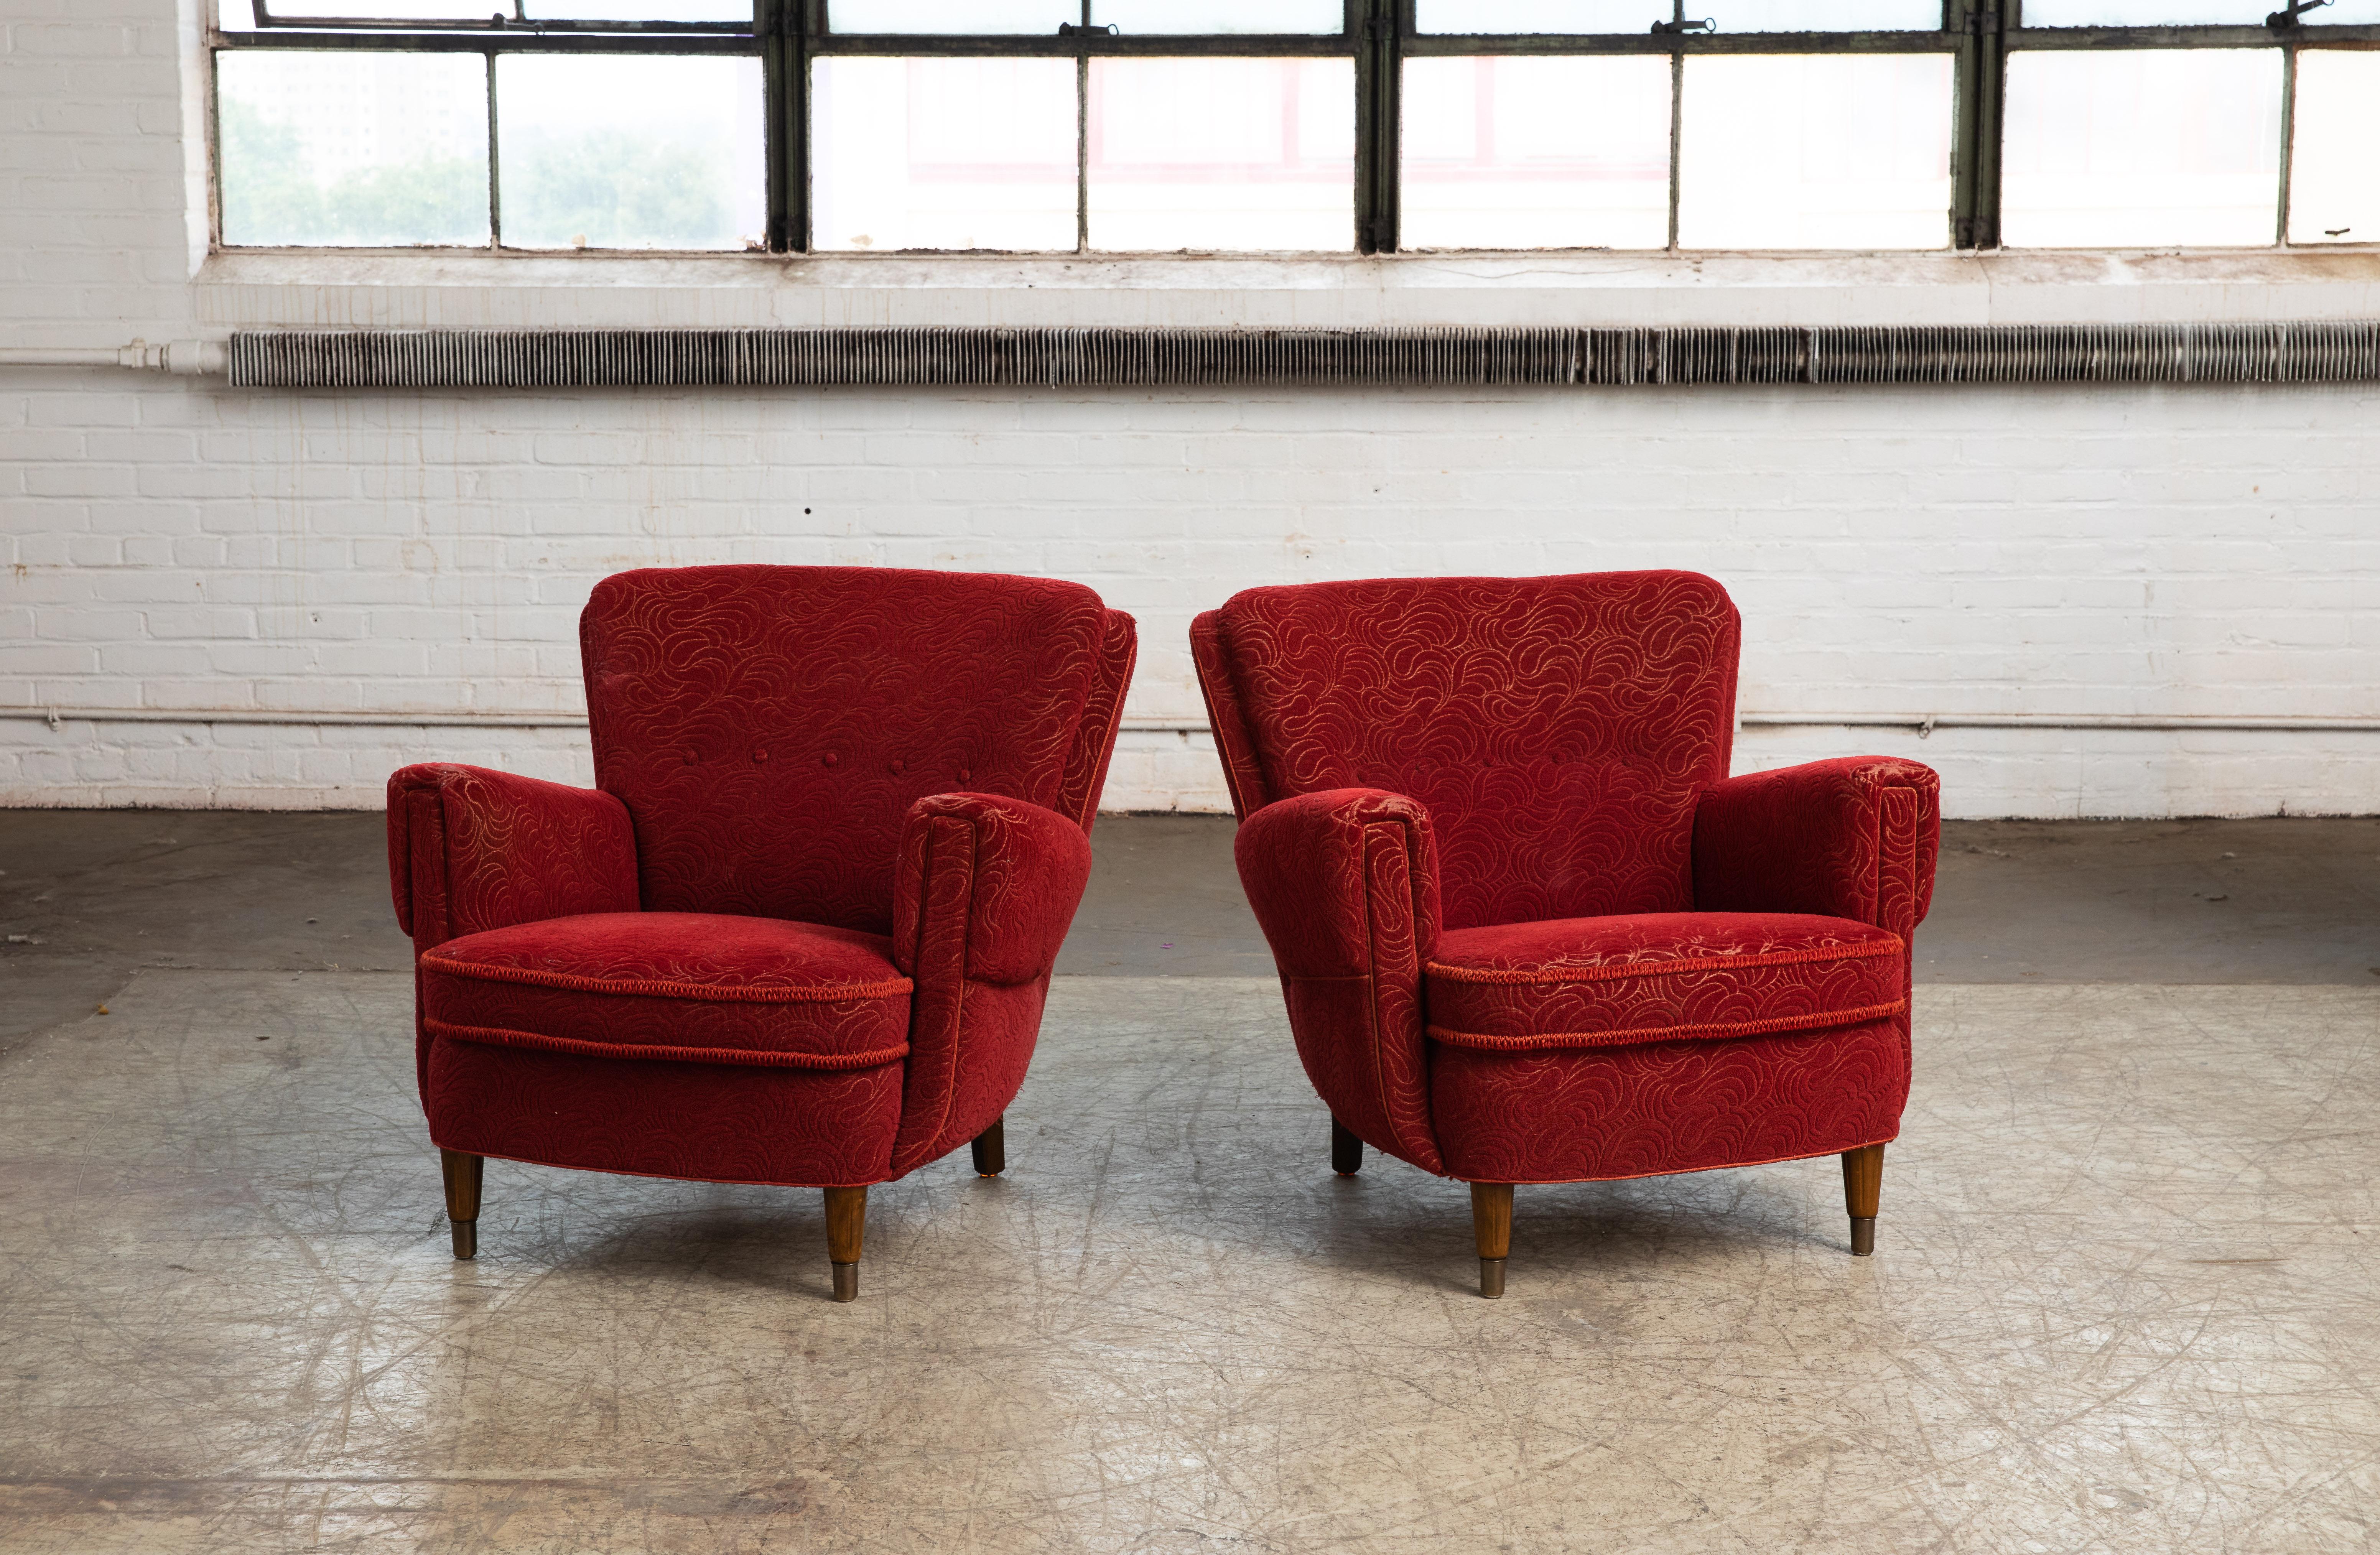 Beautiful pair of 1950s Danish easy chair in the style of Fritz Hansen. Very elegant with their distinct shape, precise lines and harmonious proportions. The size make them very versatile and well suited for today's urban homes. The design is a bit